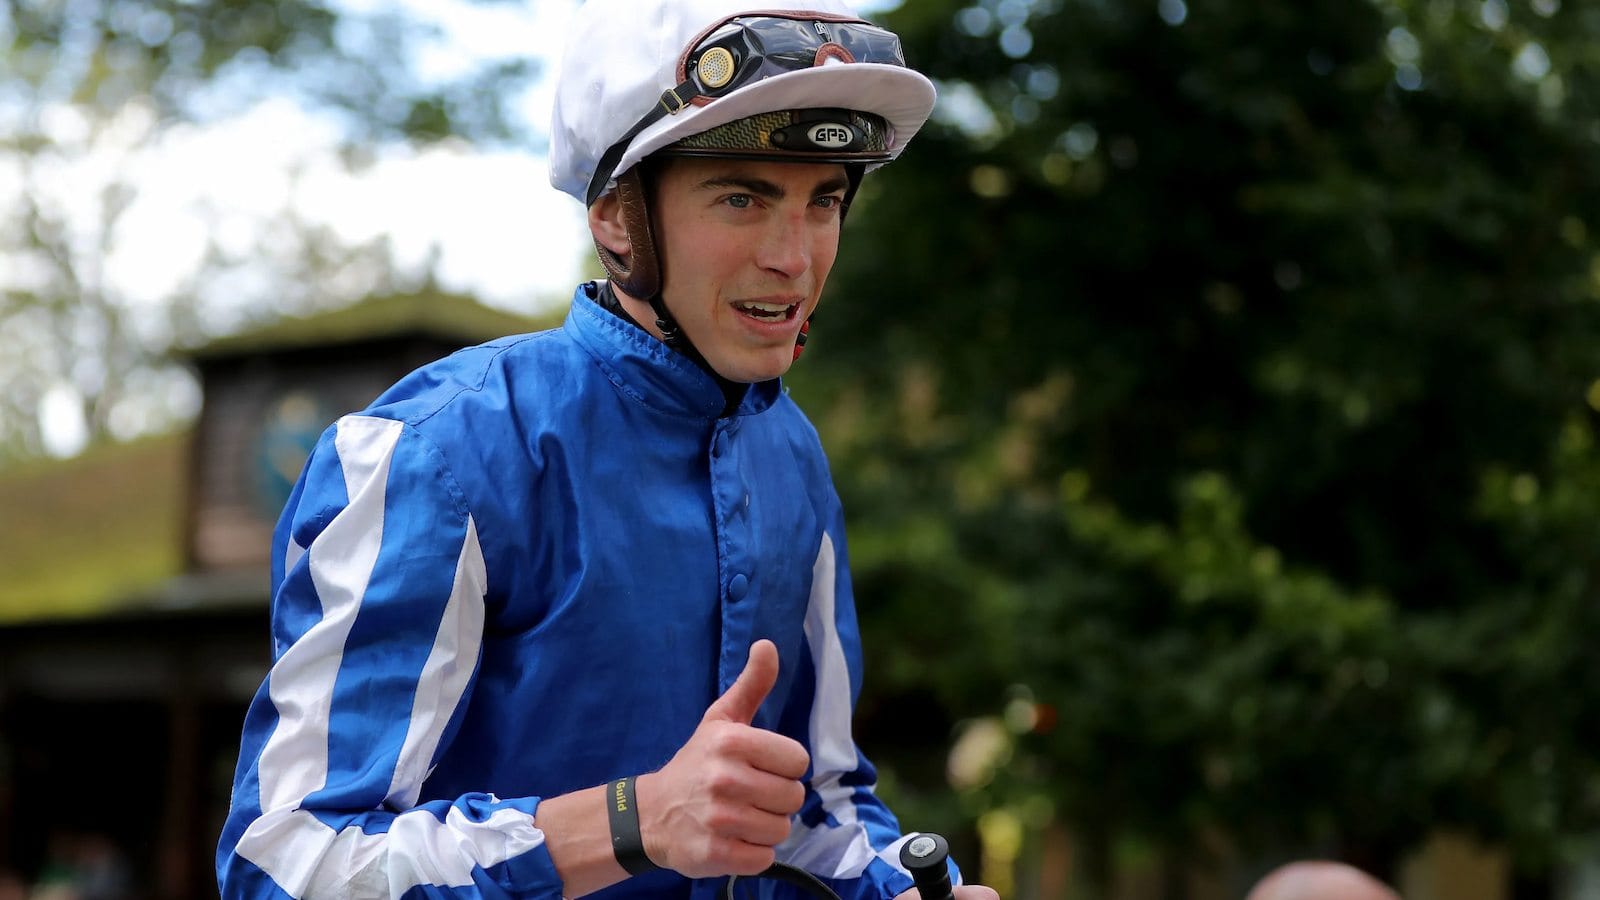 James Doyle Makes Comeback Tonight Following Two-Month Injury Layoff